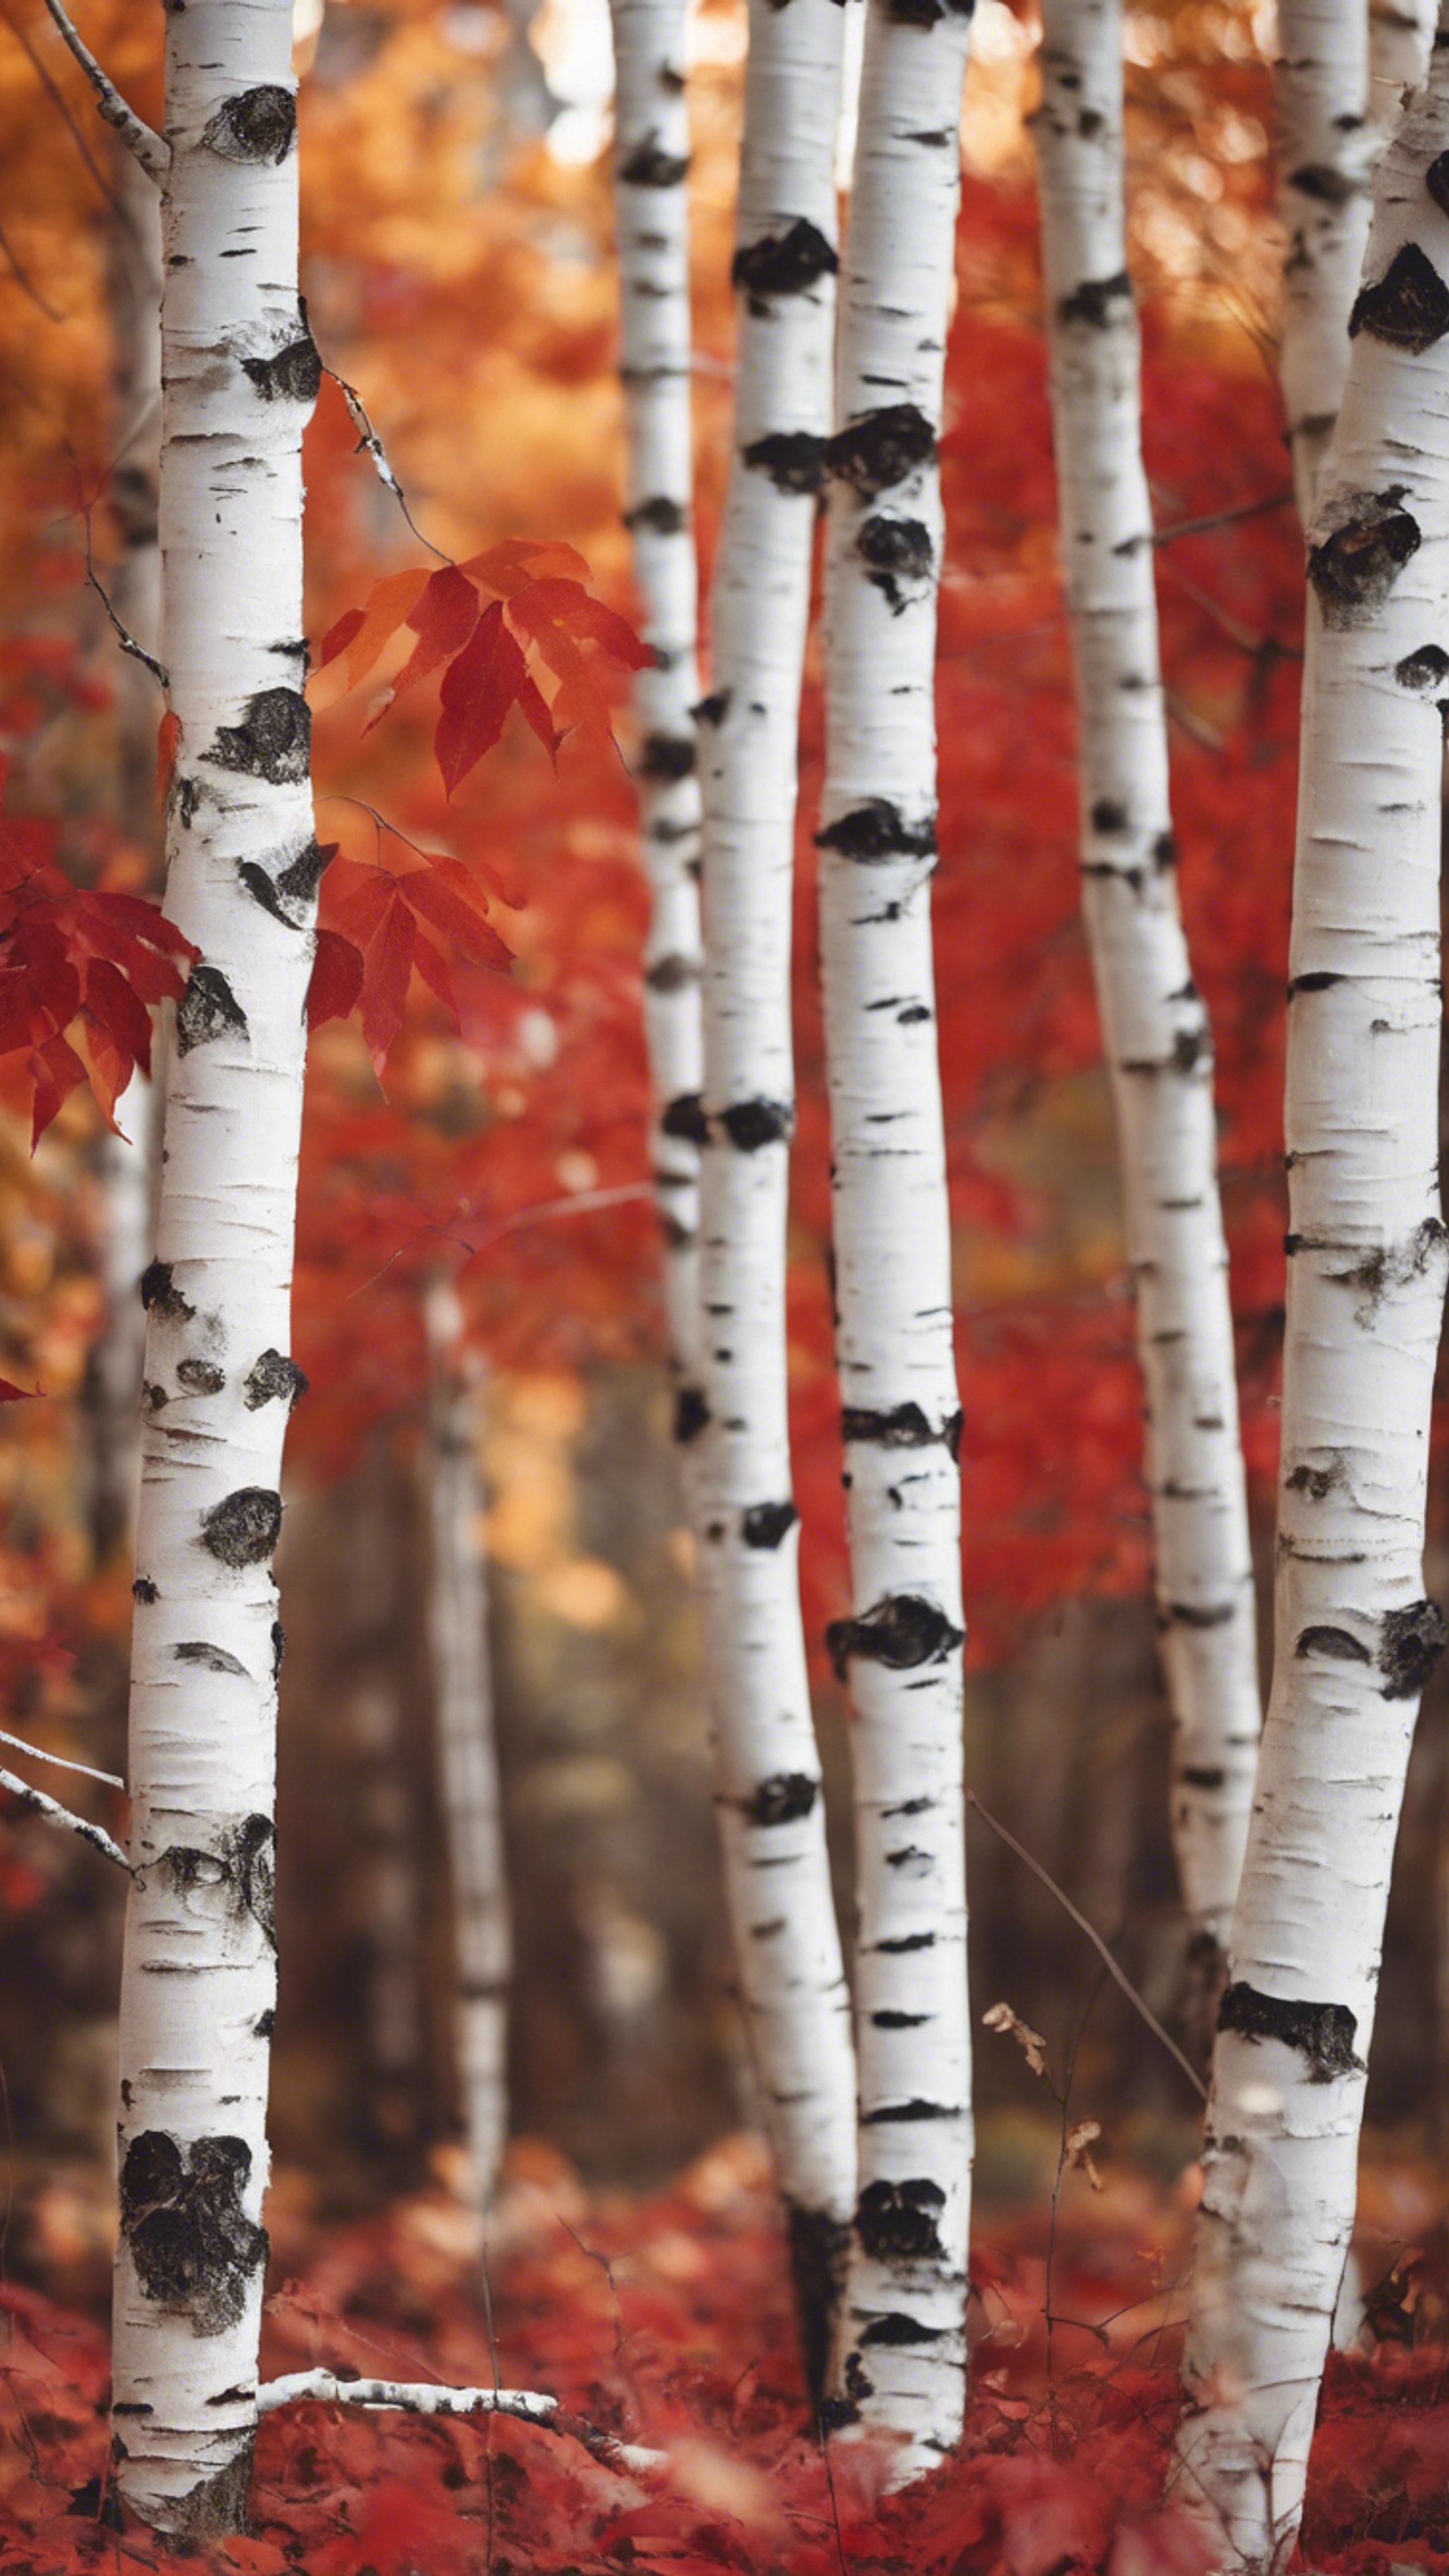 Fall scenes with white birches decked with autumn red foliage. 牆紙[2b263cdc55c54552b5f9]